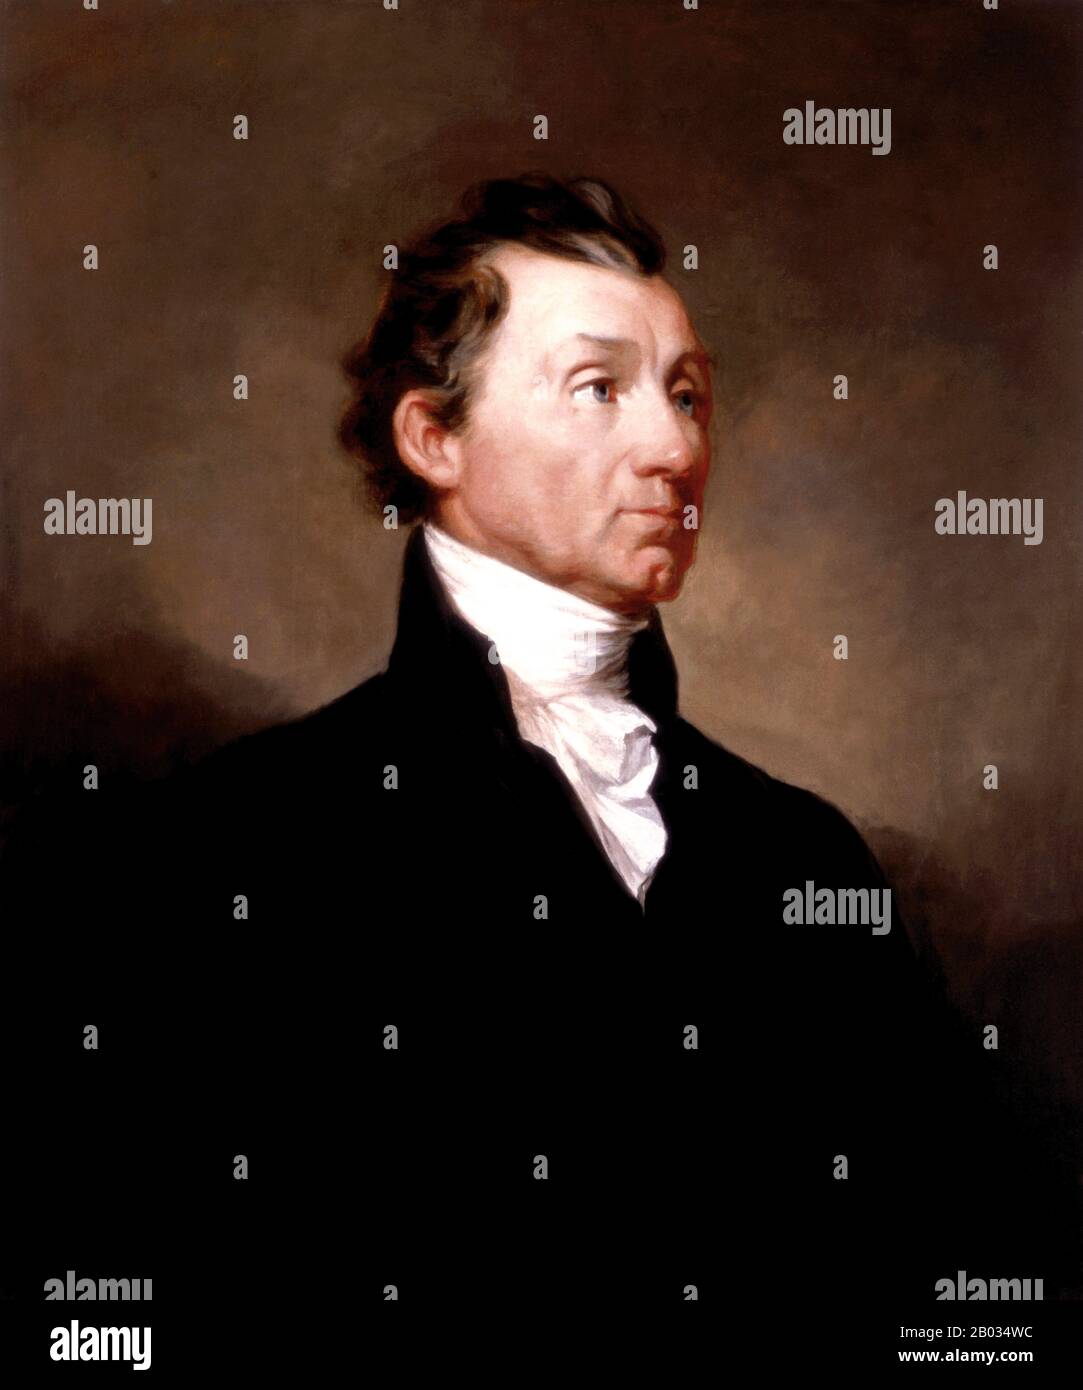 James Monroe (April 28, 1758 – July 4, 1831) was the fifth President of the United States, serving between 1817 and 1825. Monroe was the last president who was a Founding Father of the United States and the last president from the Virginian dynasty and the Republican Generation.  He gained experience as an executive as the Governor of Virginia and rose to national prominence as a diplomat in France, when he helped negotiate the Louisiana Purchase in 1803. During the War of 1812, Monroe held the critical roles of Secretary of State and the Secretary of War under President James Madison. Stock Photo